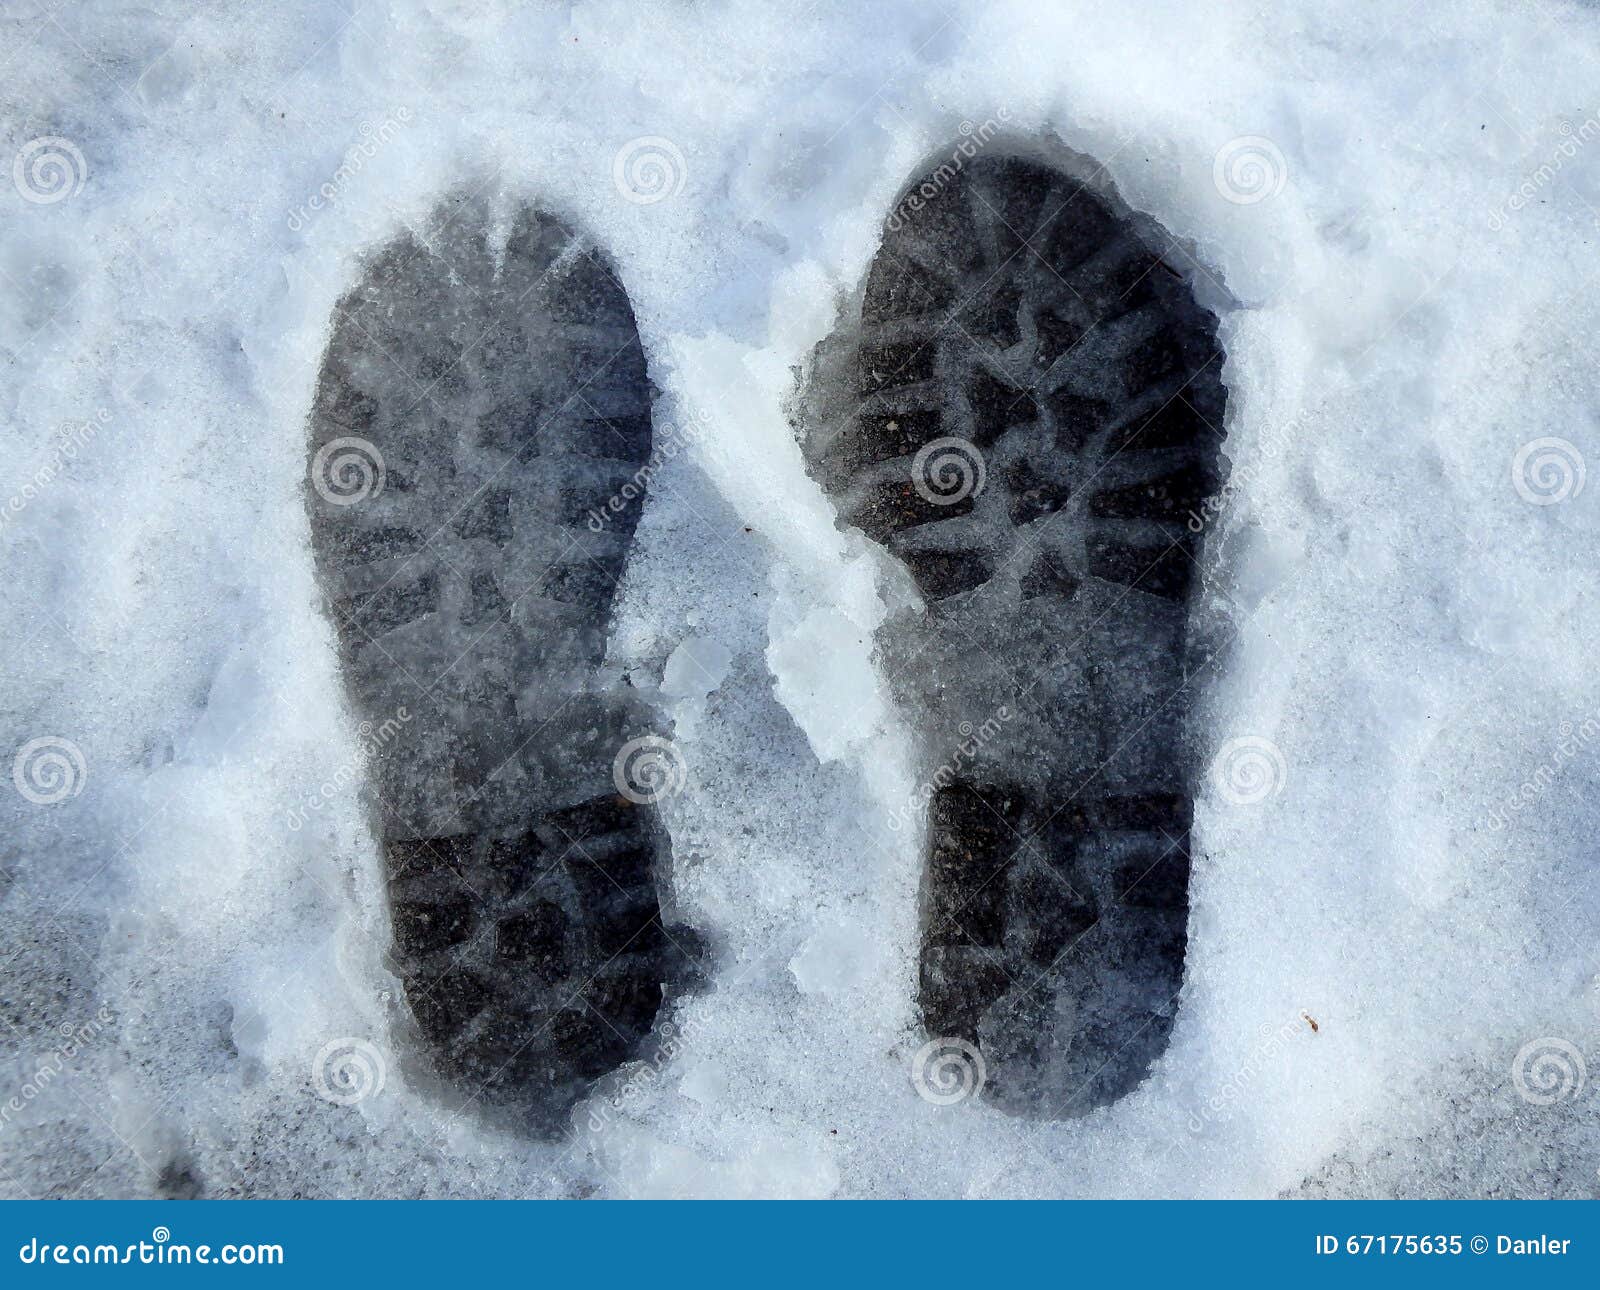 Tracks in the snow stock image. Image of shoes, footprint - 67175635